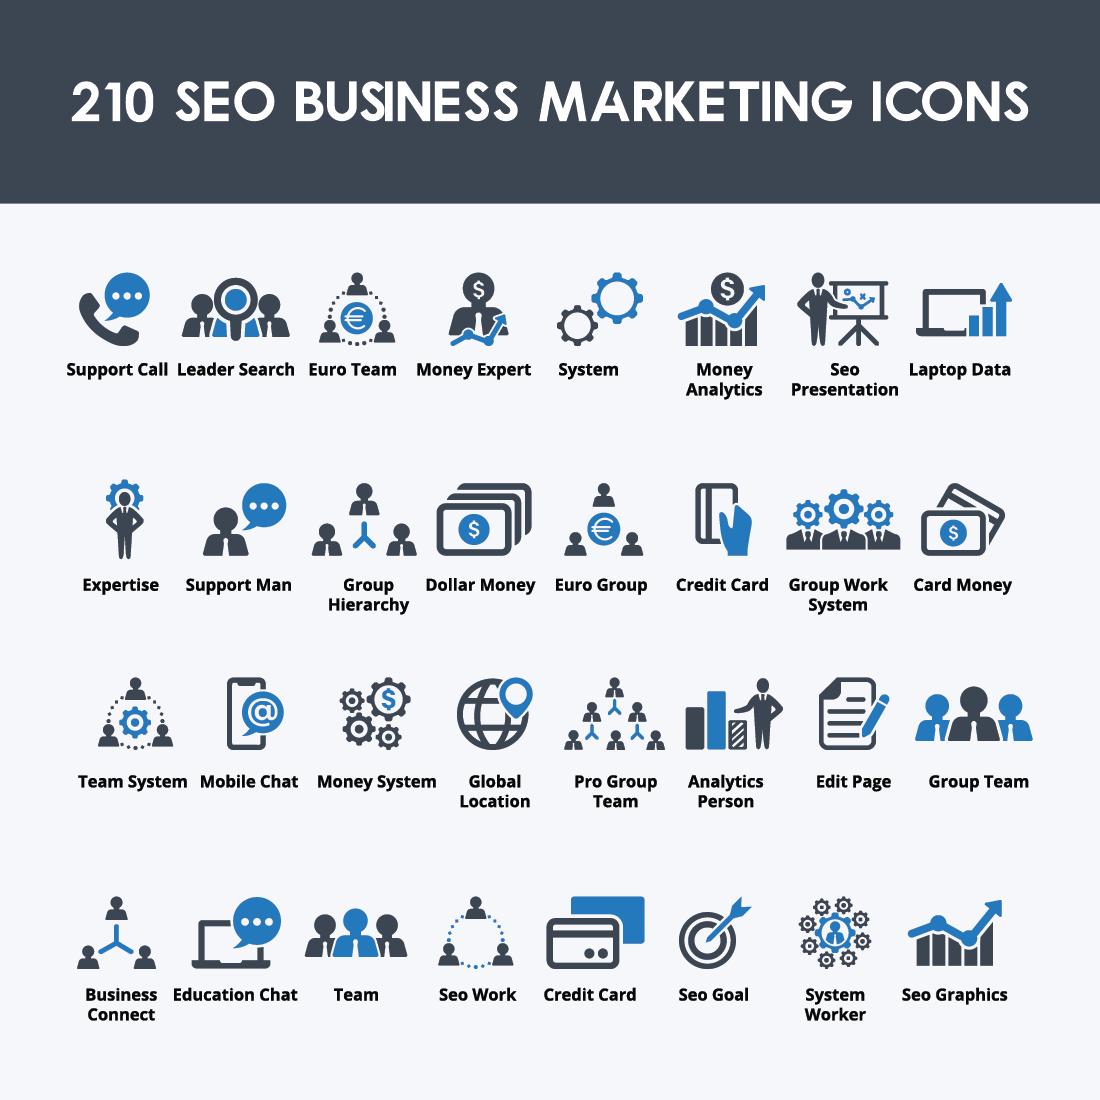 210 Seo Business Marketing Icons cover image.